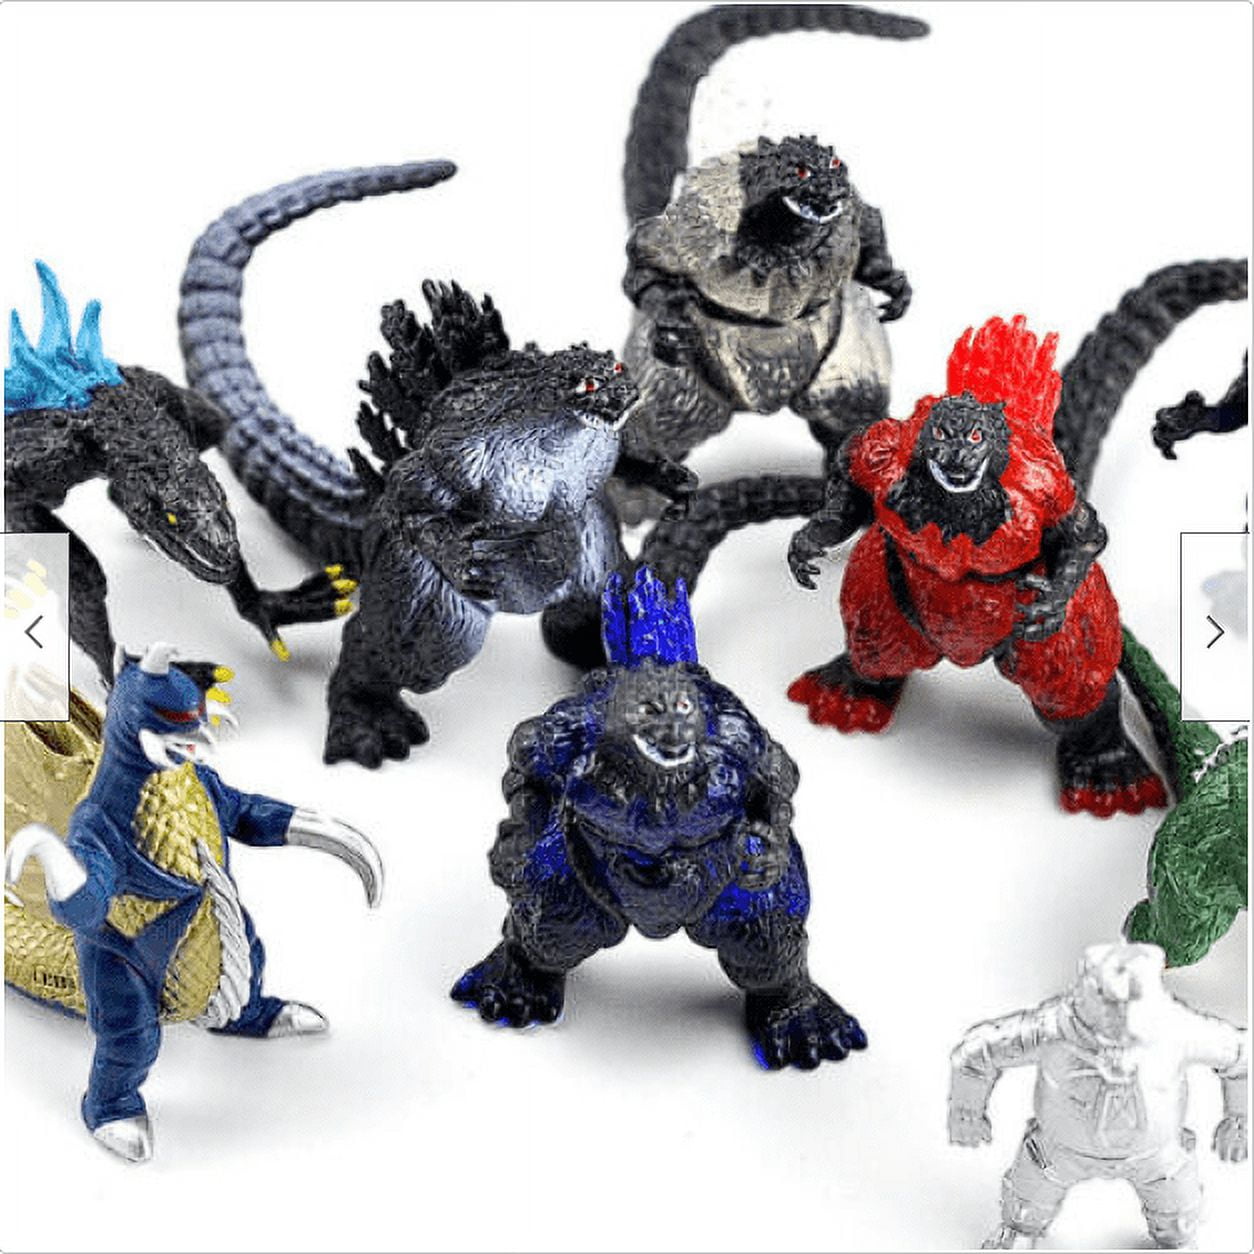 MG traders Godzilla Action Figure Toy Set-10pcs/set - Godzilla Action Figure  Toy Set-10pcs/set . Buy Action figures toys in India. shop for MG traders  products in India.